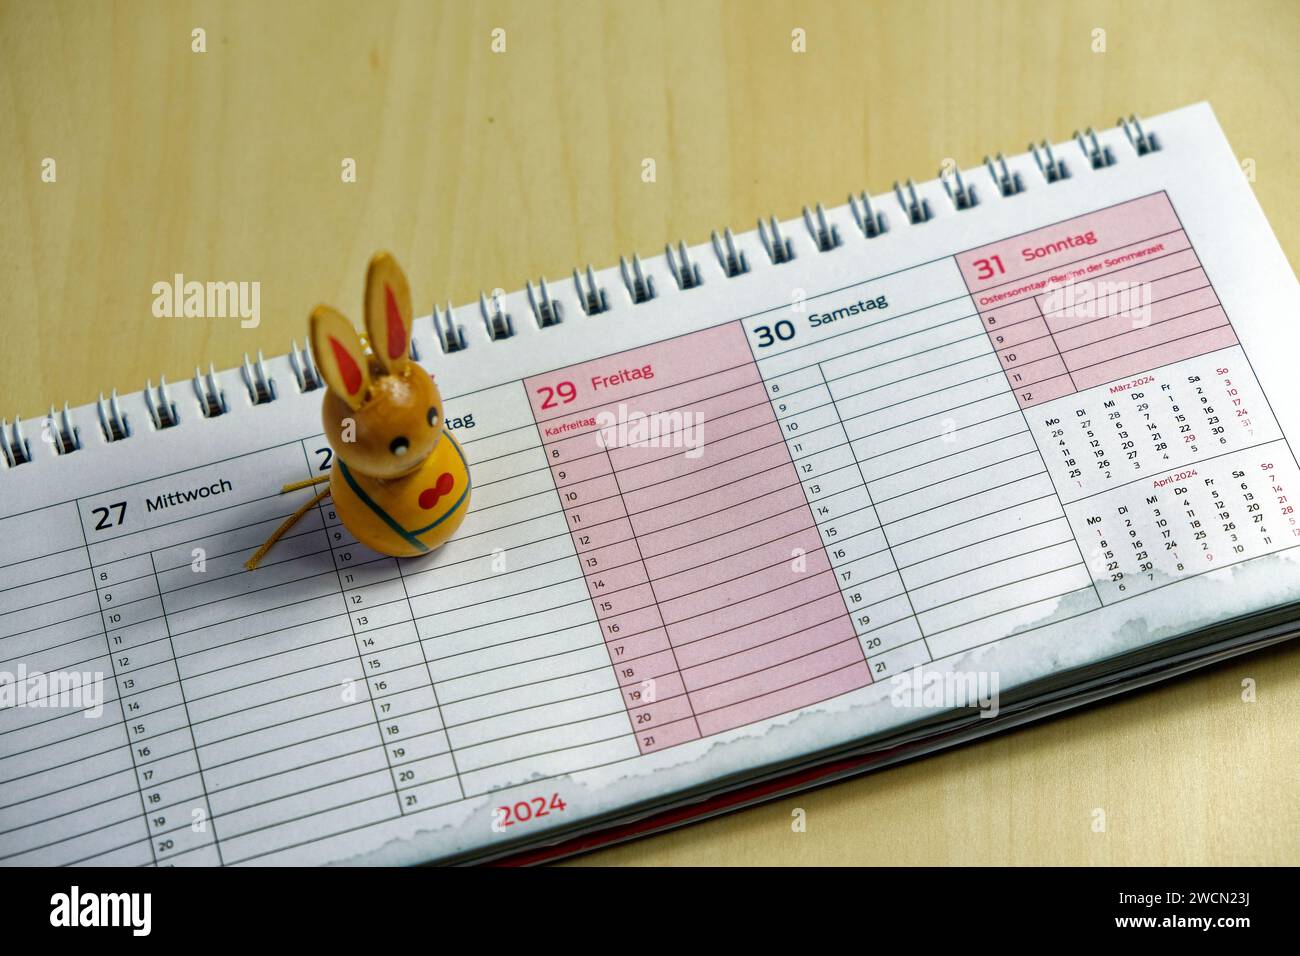 Symbolic image of the Easter holidays: Easter bunny on a calendar showing date of easter 2024 Stock Photo